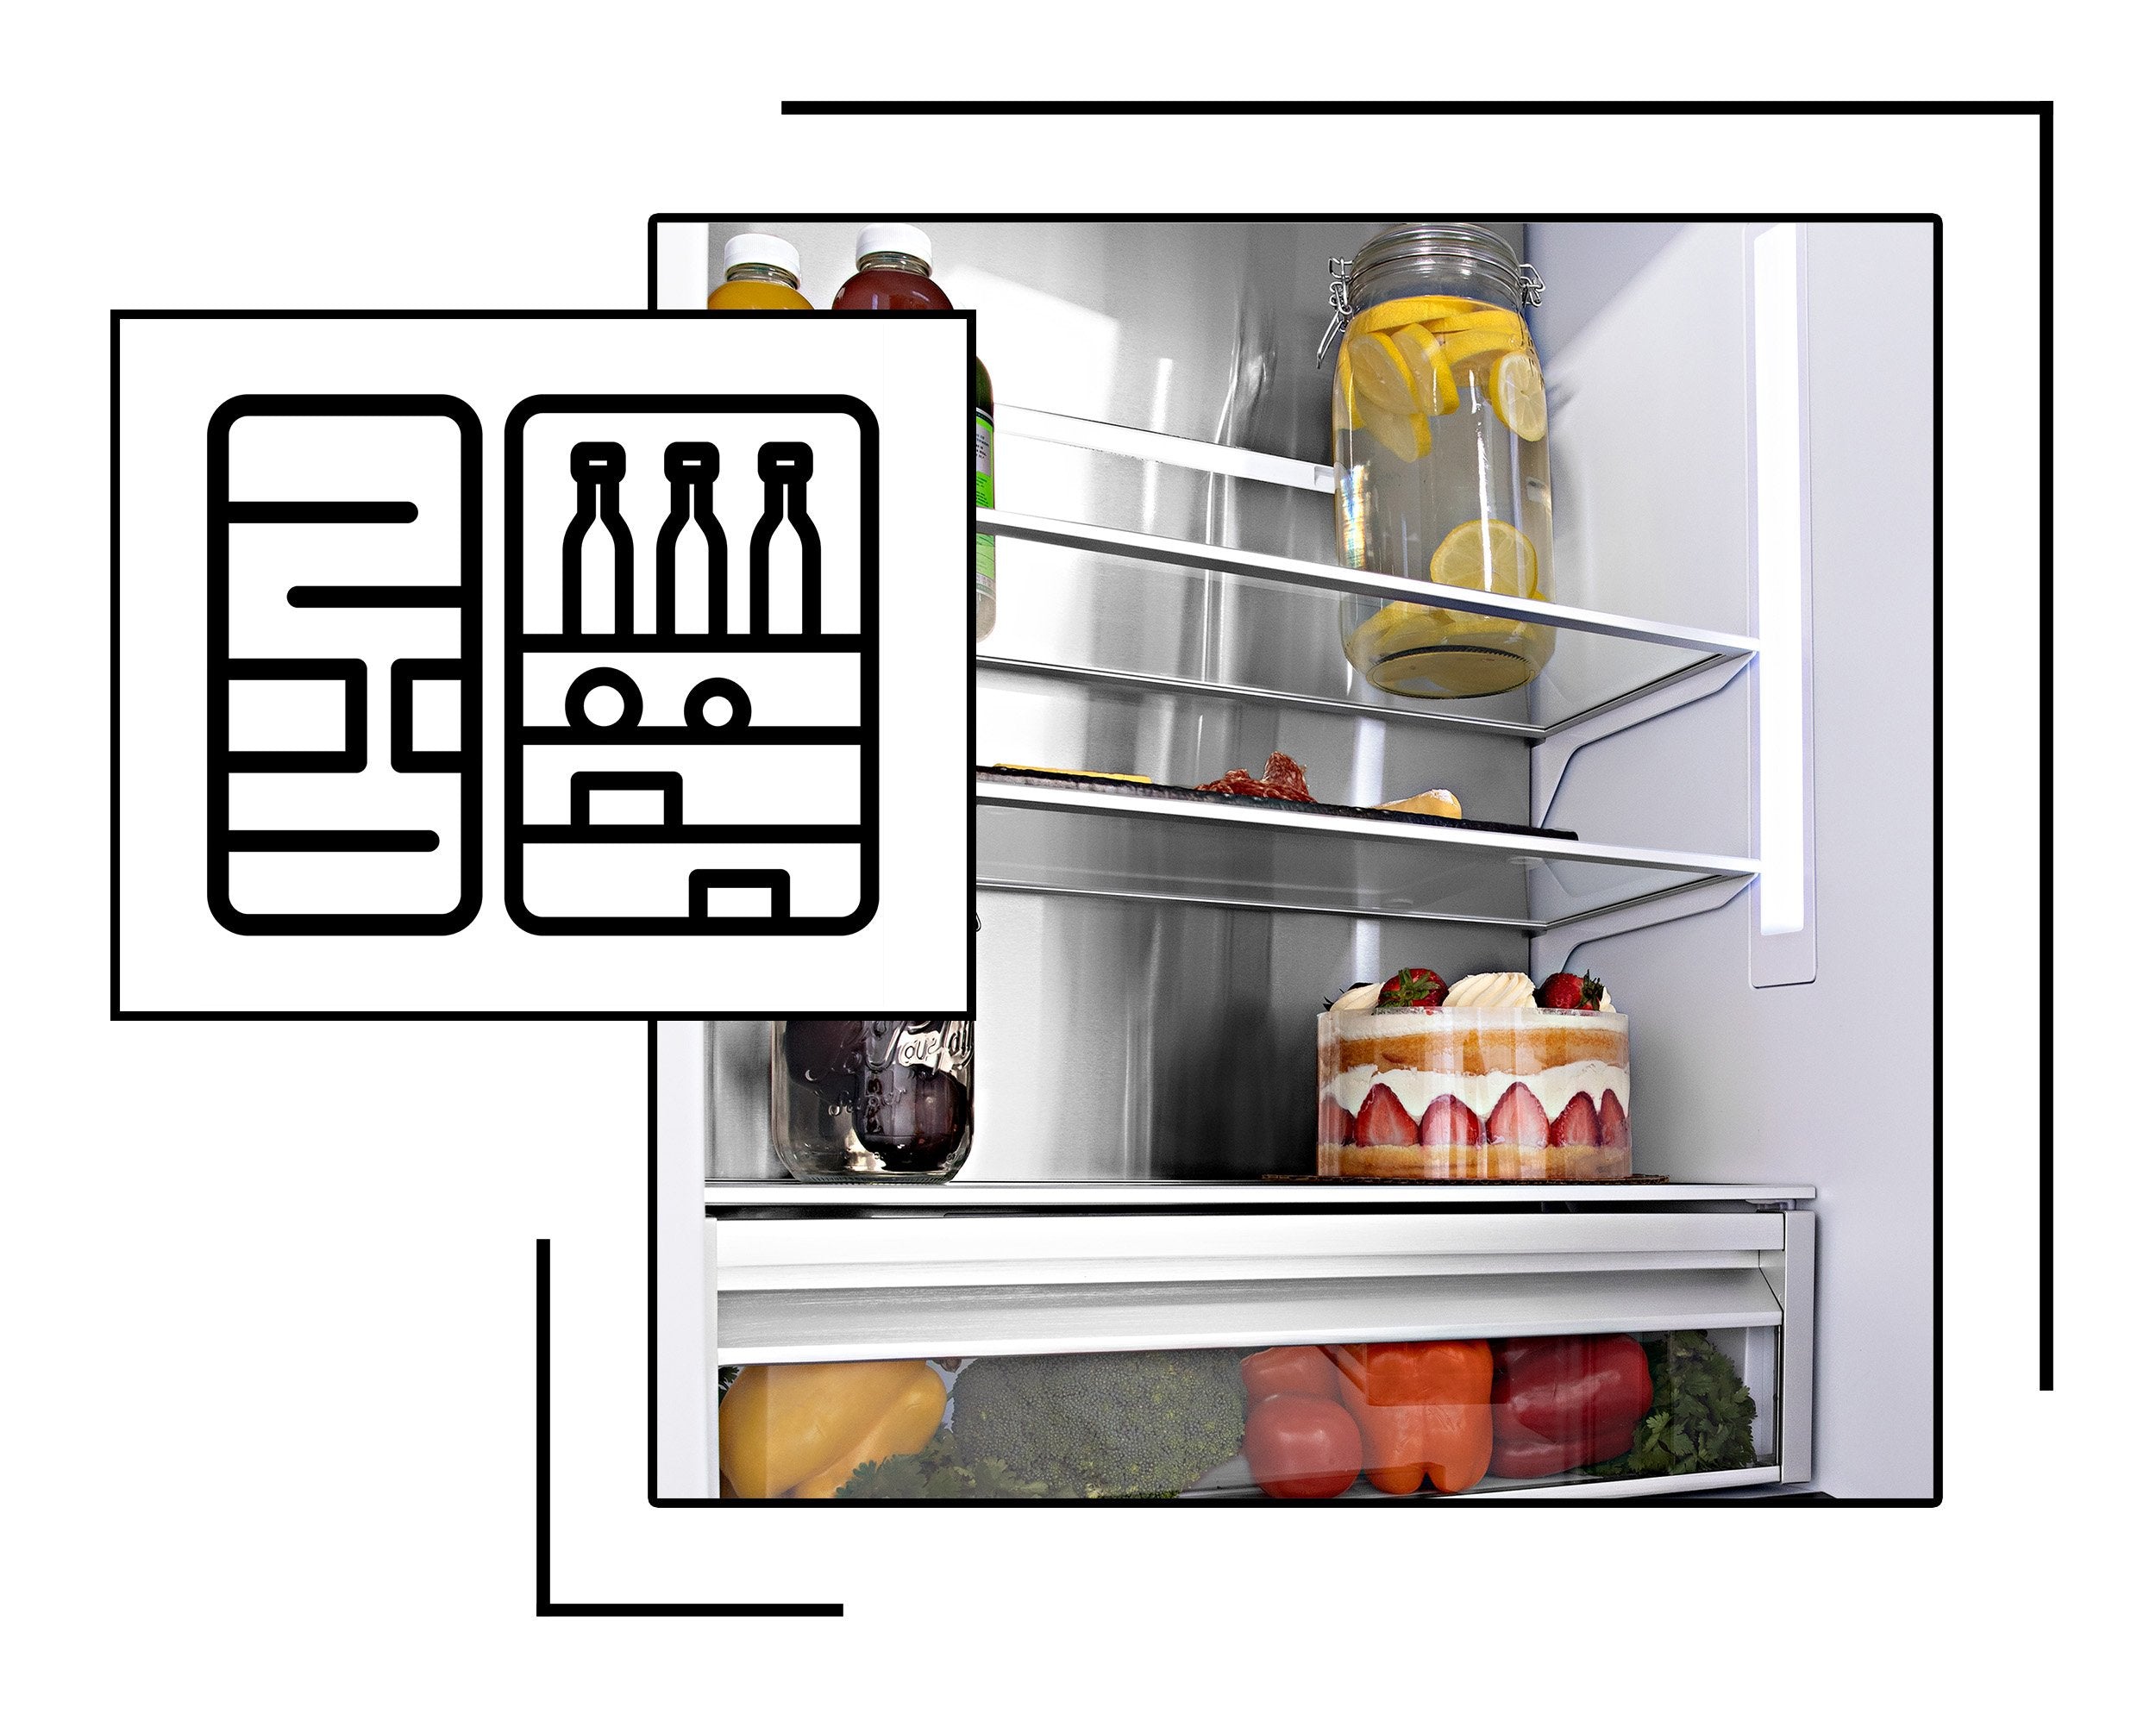 Icon and image representing adjustable shelving in built-in refrigeration